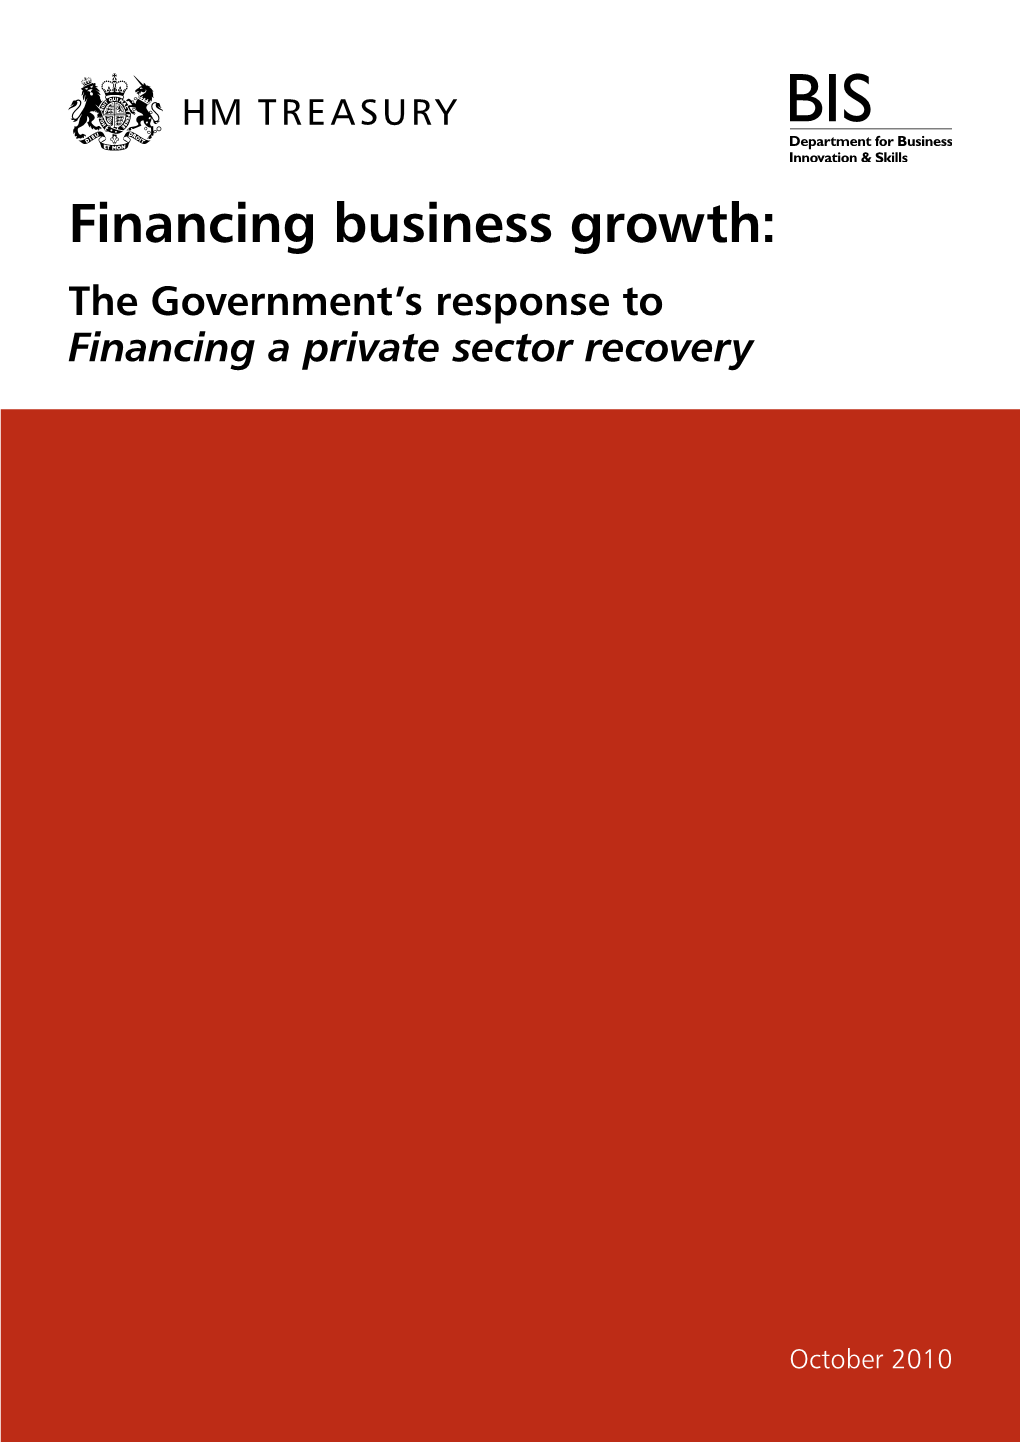 Financing Business Growth: the Government's Response To